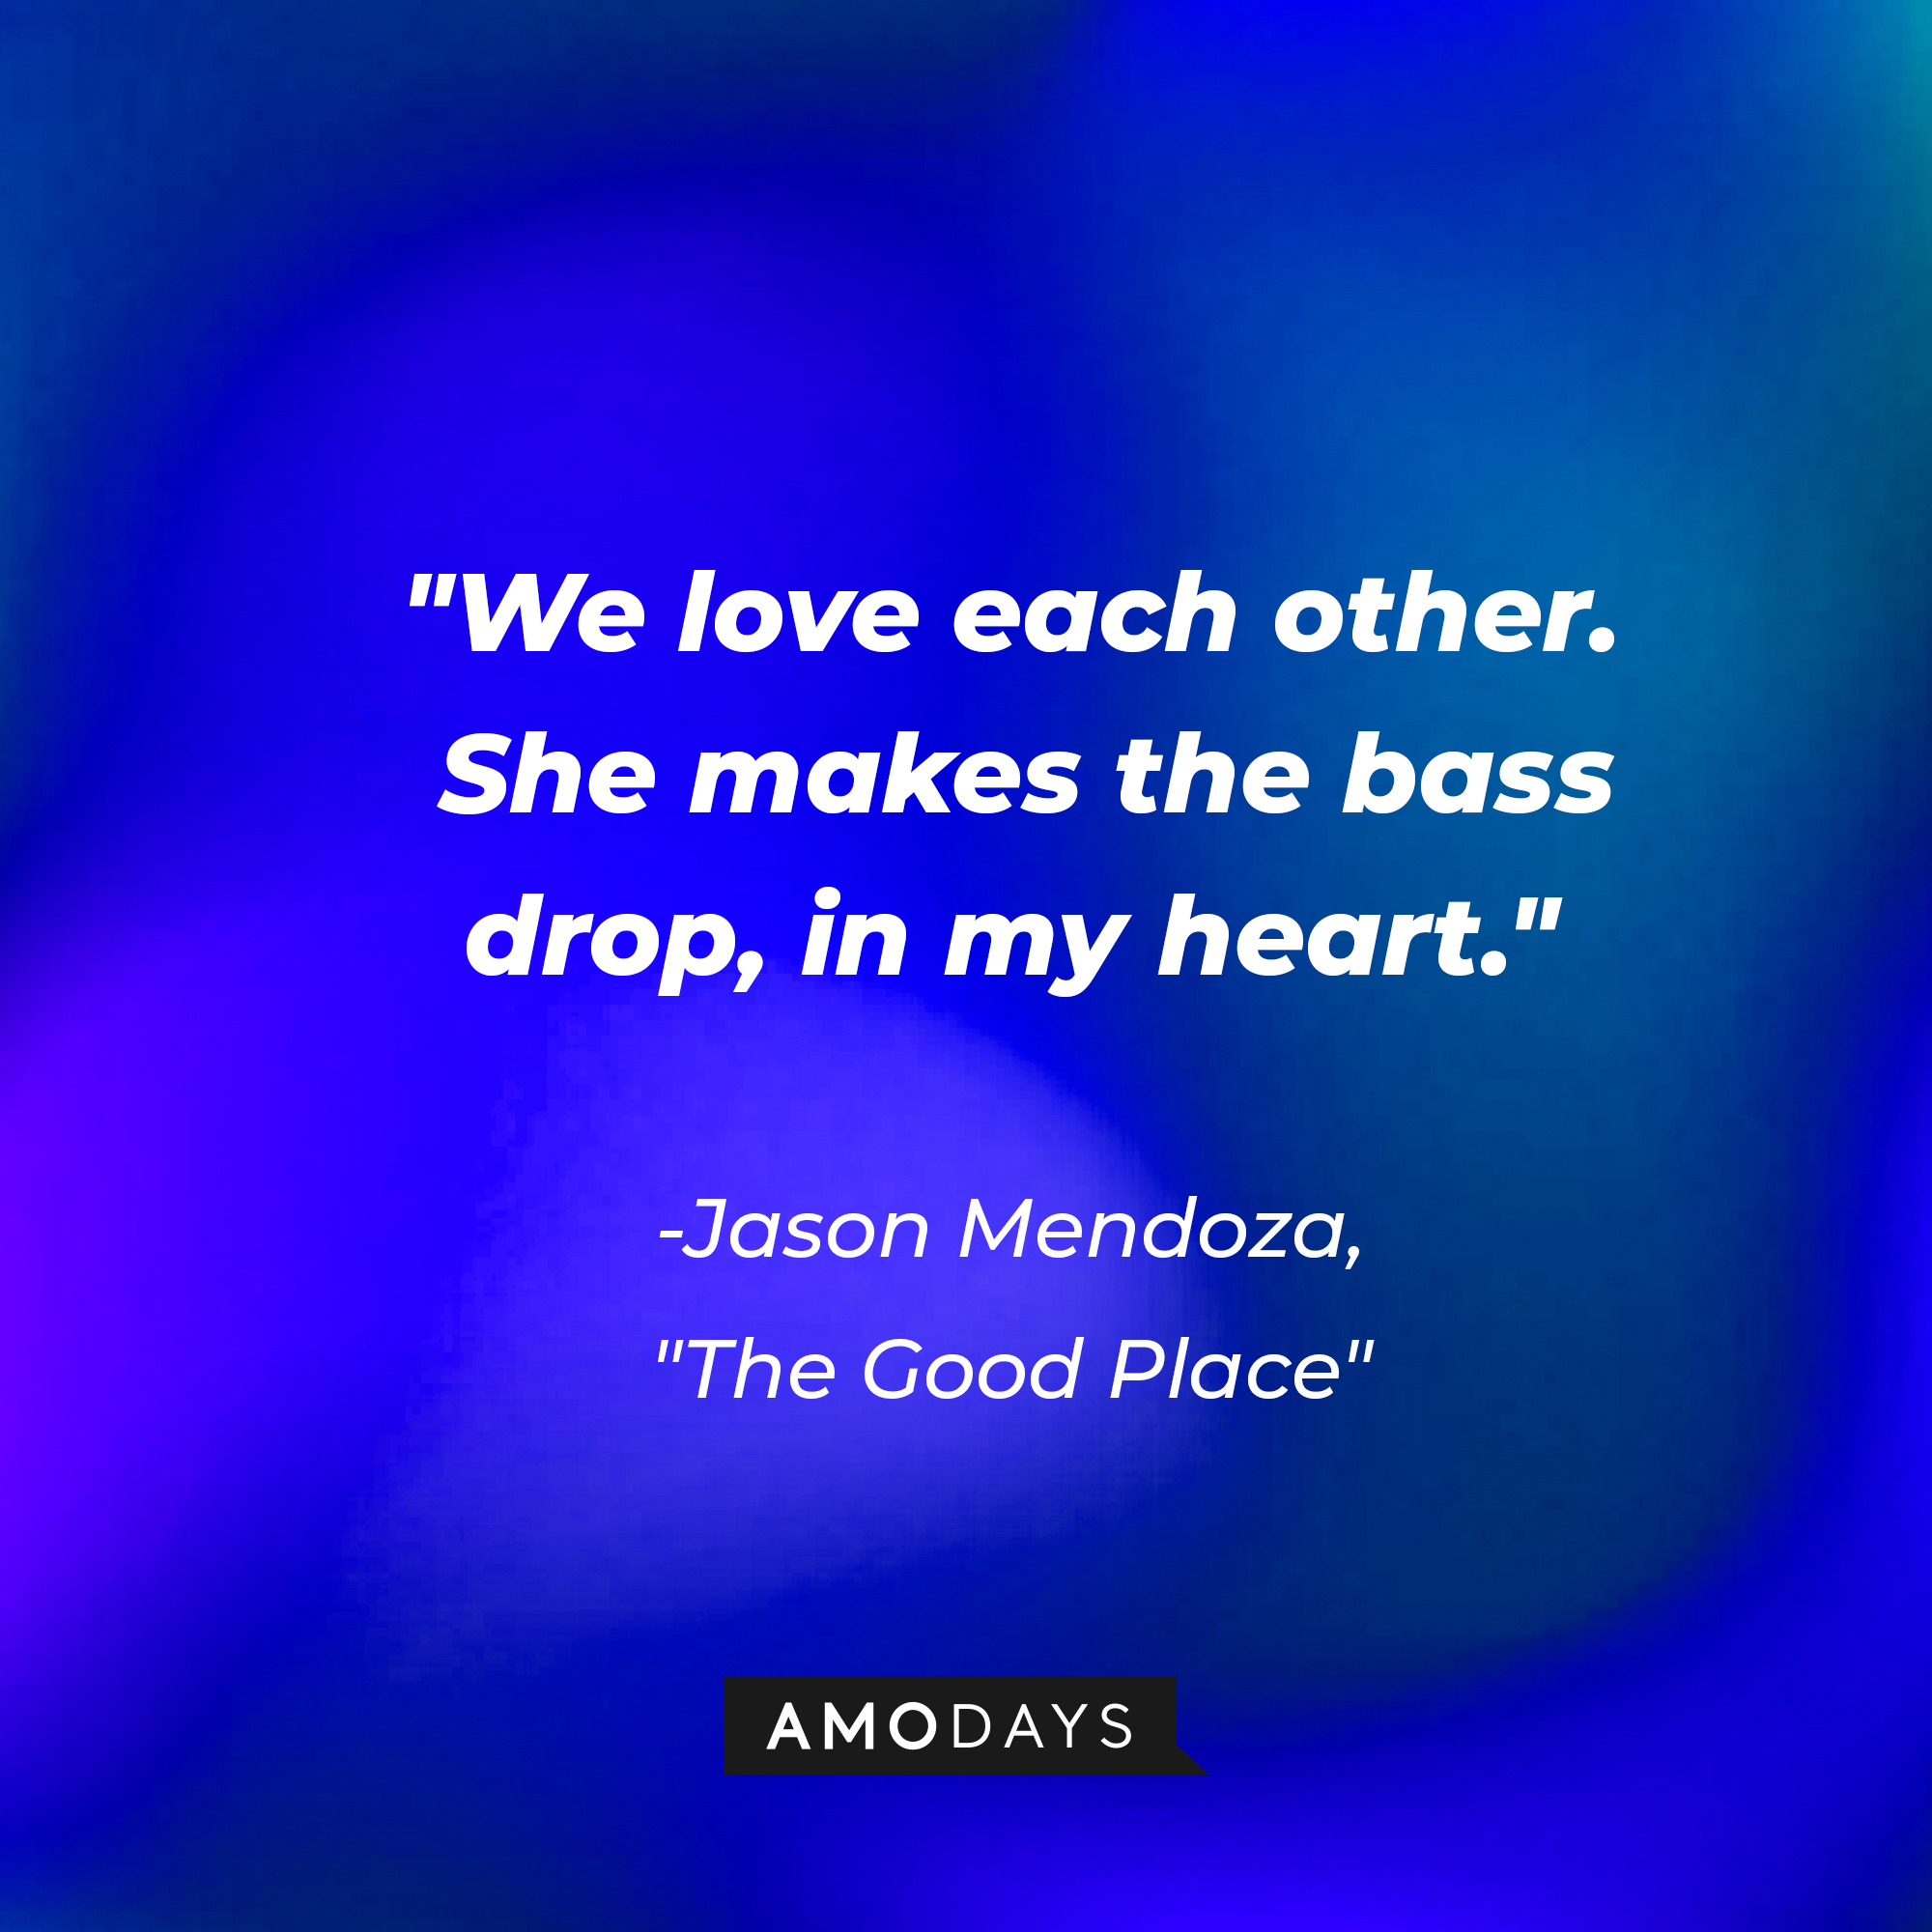 Jason Mendoza's quote in "The Good Place:" “We love each other. She makes the bass drop, in my heart.” | Source: Amodays